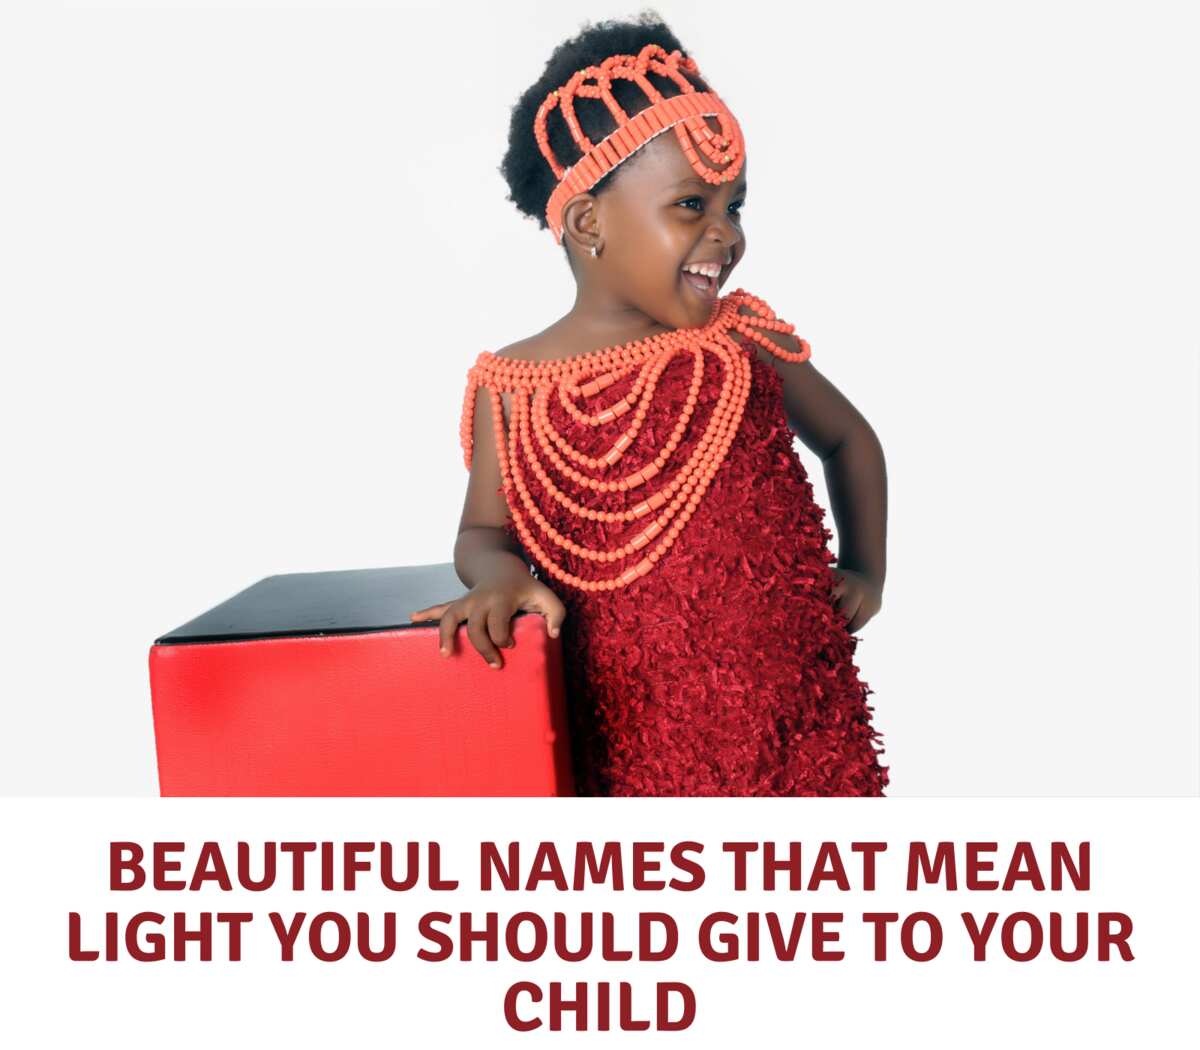 50+ beautiful names that mean light you give to your child - Legit.ng